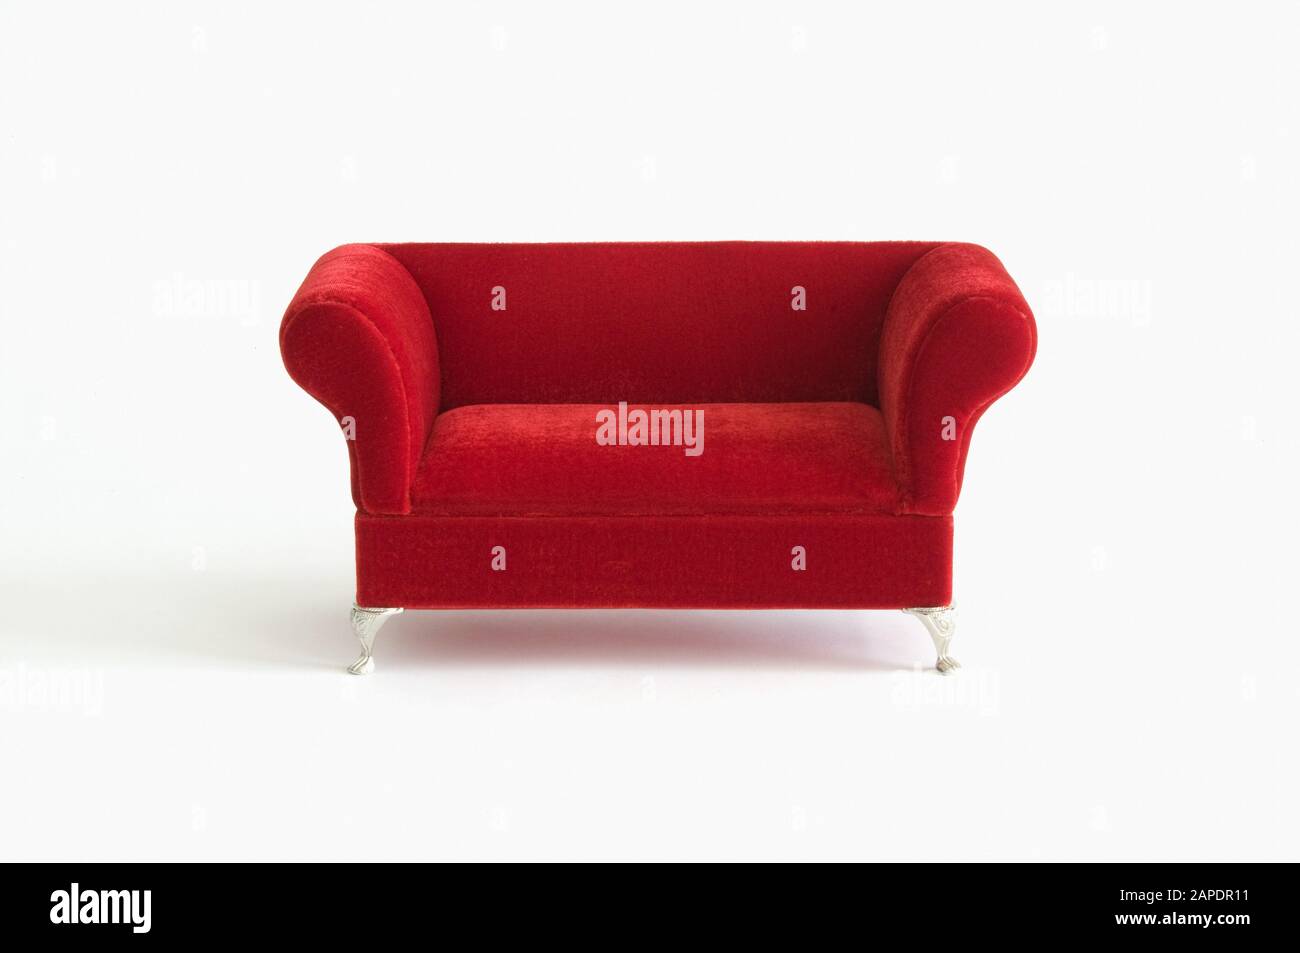 Rotes Sofa - Red Couch Stock Photo